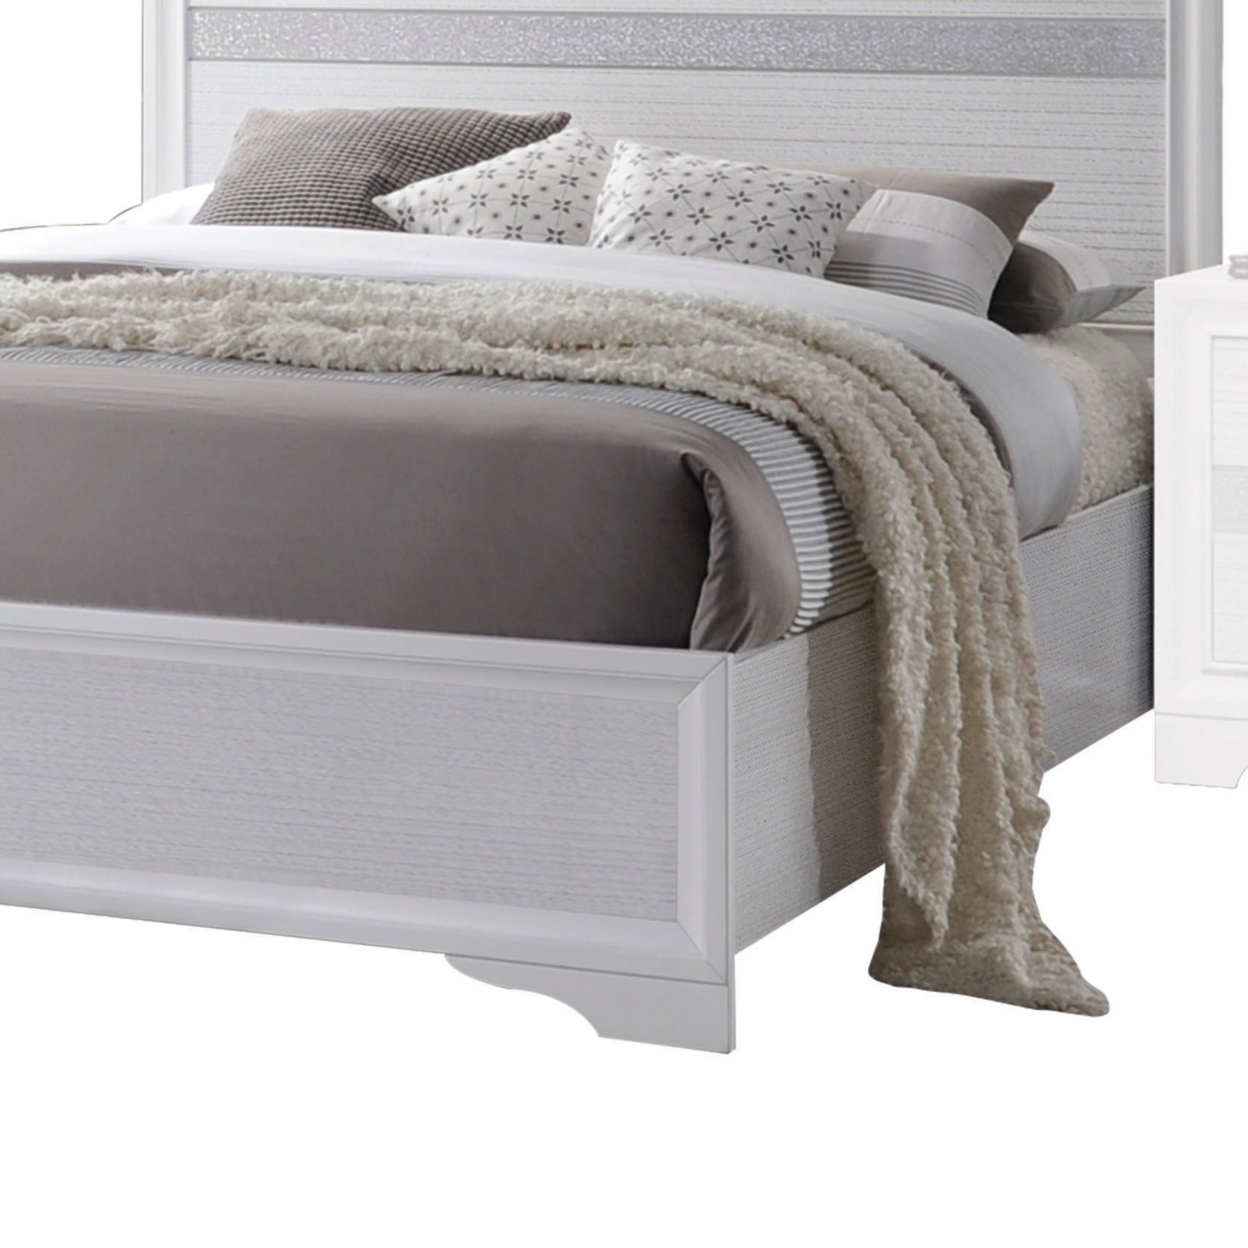 Panel Design Full Bed With Acrylic Trim Accents And Bracket Feet, White- Saltoro Sherpi